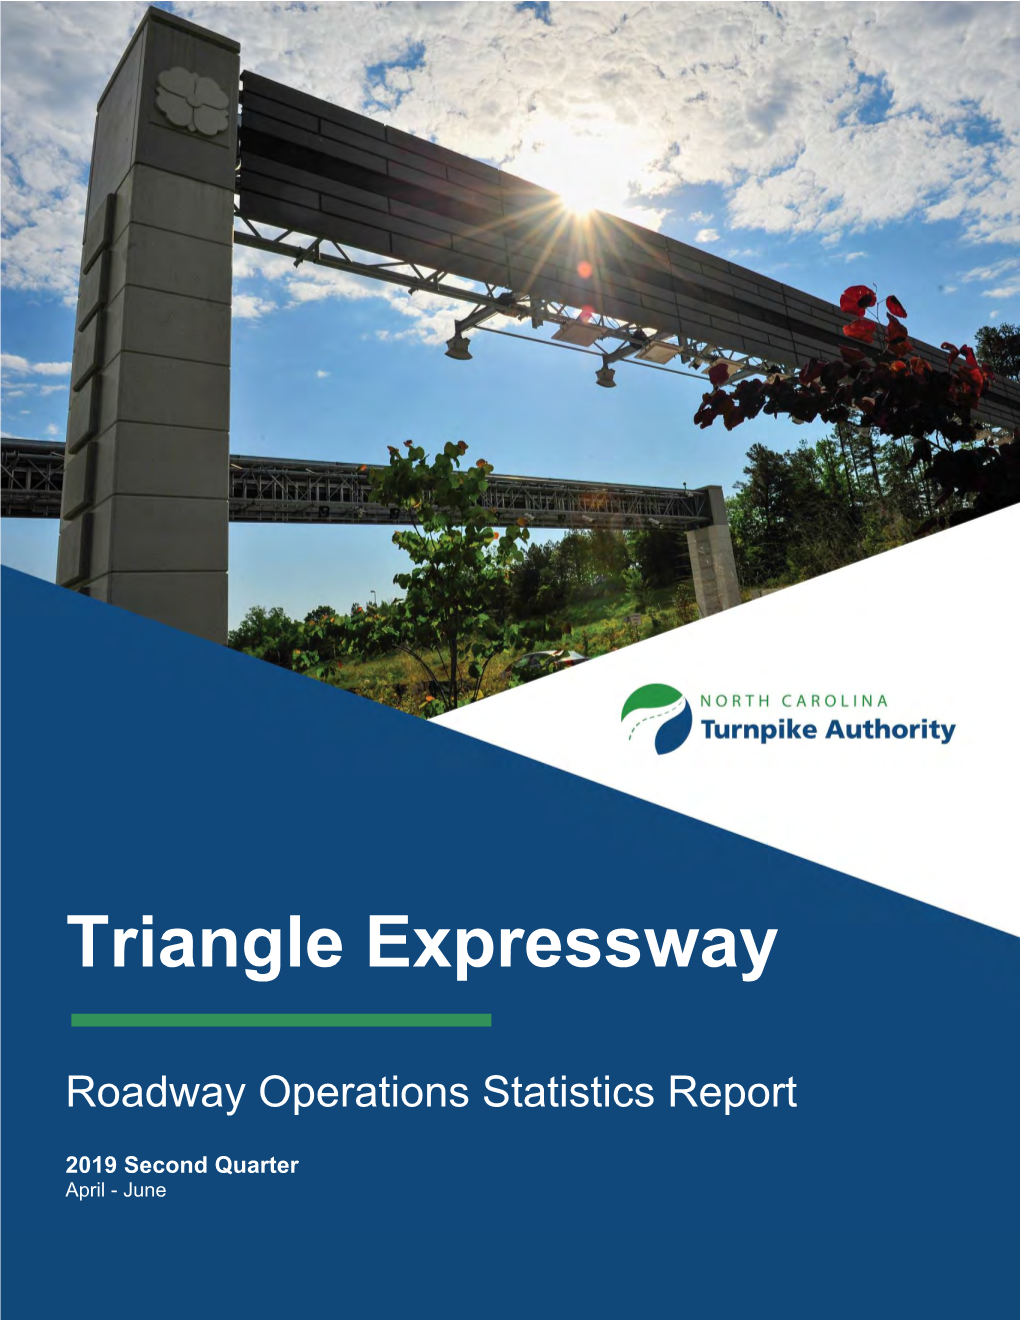 Operations Statistics Report for the Monroe Expressway